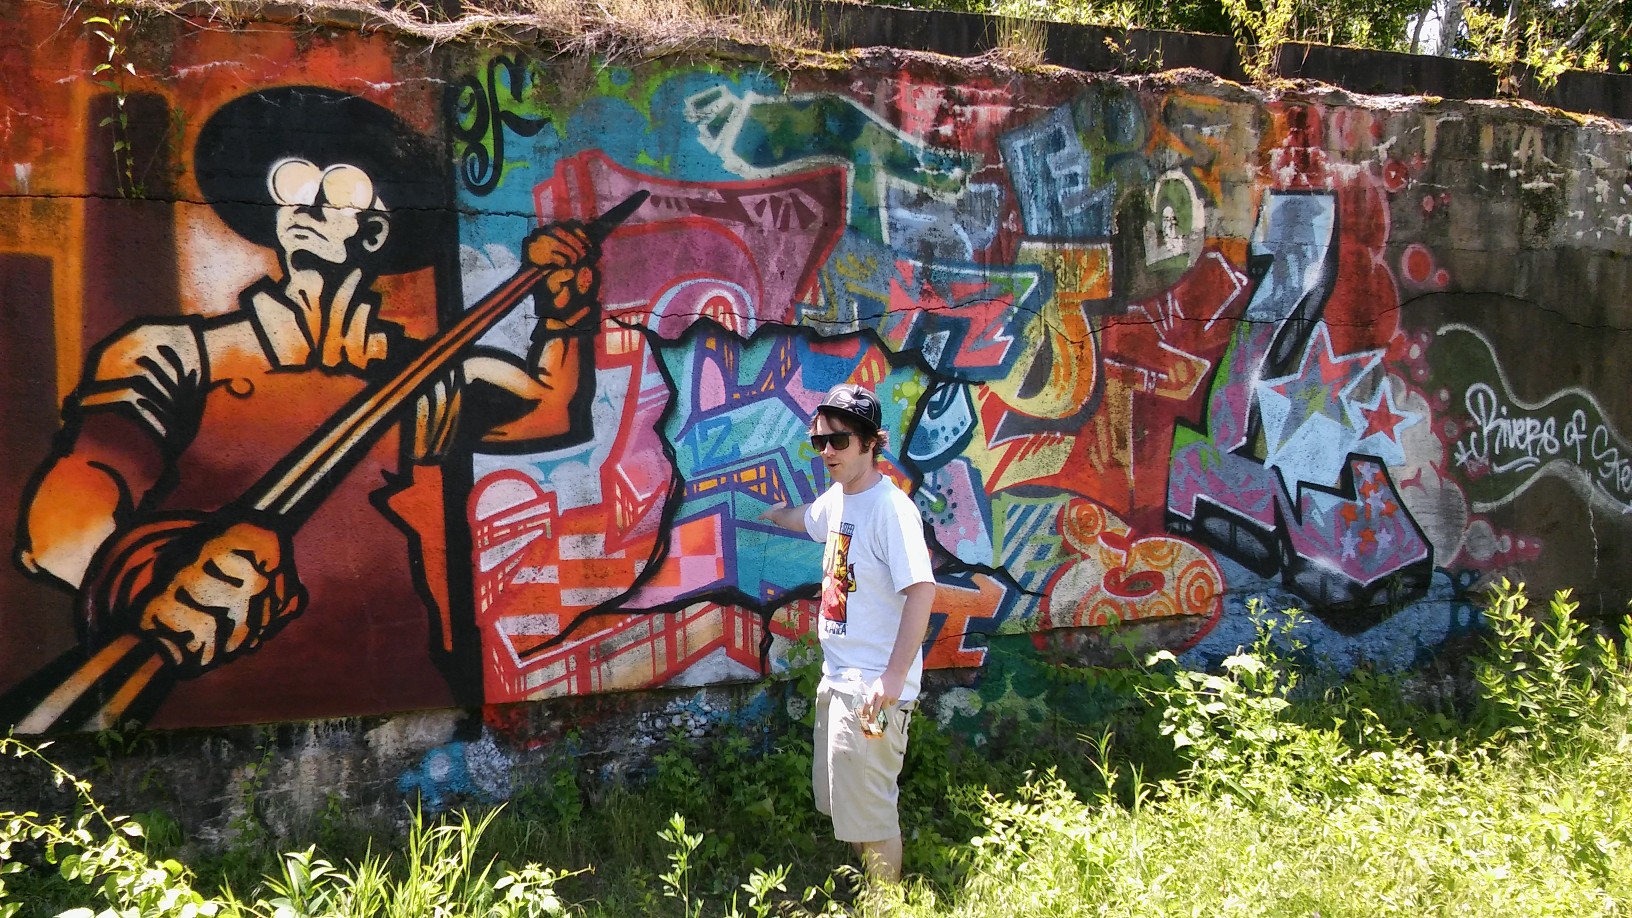 Shane Pilster, graffiti artist, graphic designer, and urban arts coordinator for the Rivers of Steel National Heritage Area, in front of a graffiti mural at the Carrie Furnace site. (Lake Fong/Pittsburgh Post-Gazette)